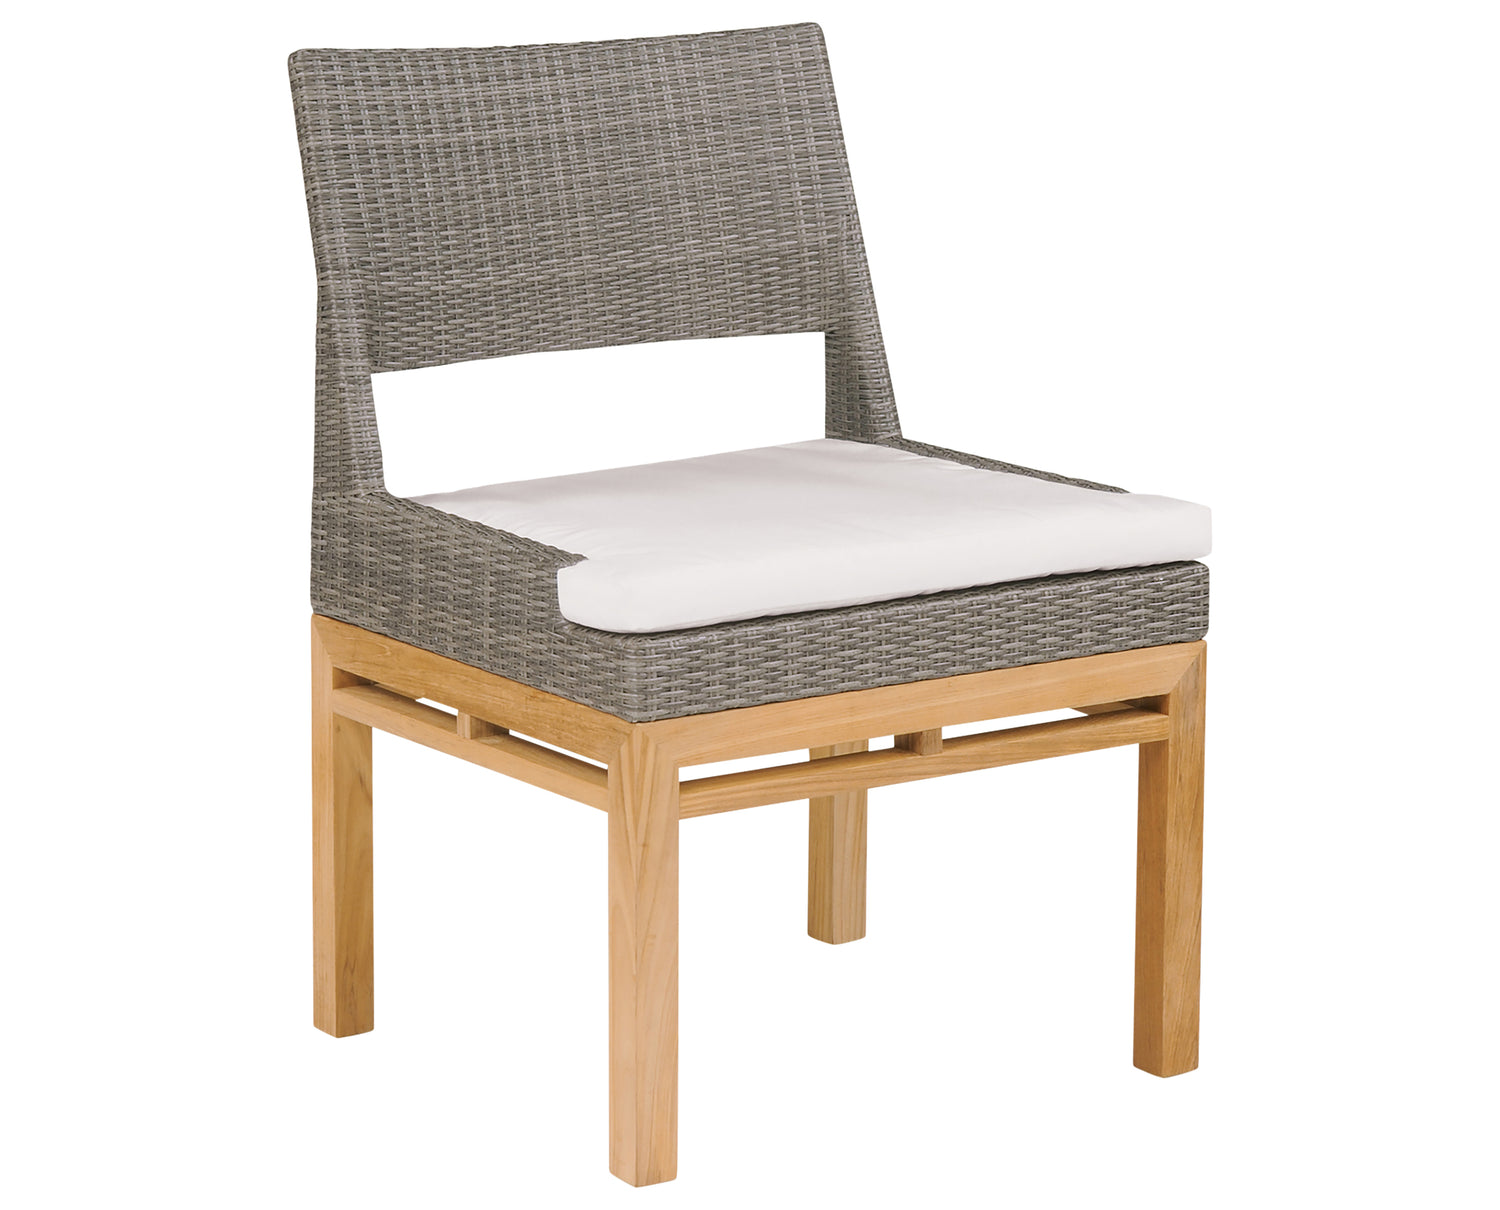 Dining Side Chair | Kingsley Bate Azores Collection | Valley Ridge Furniture